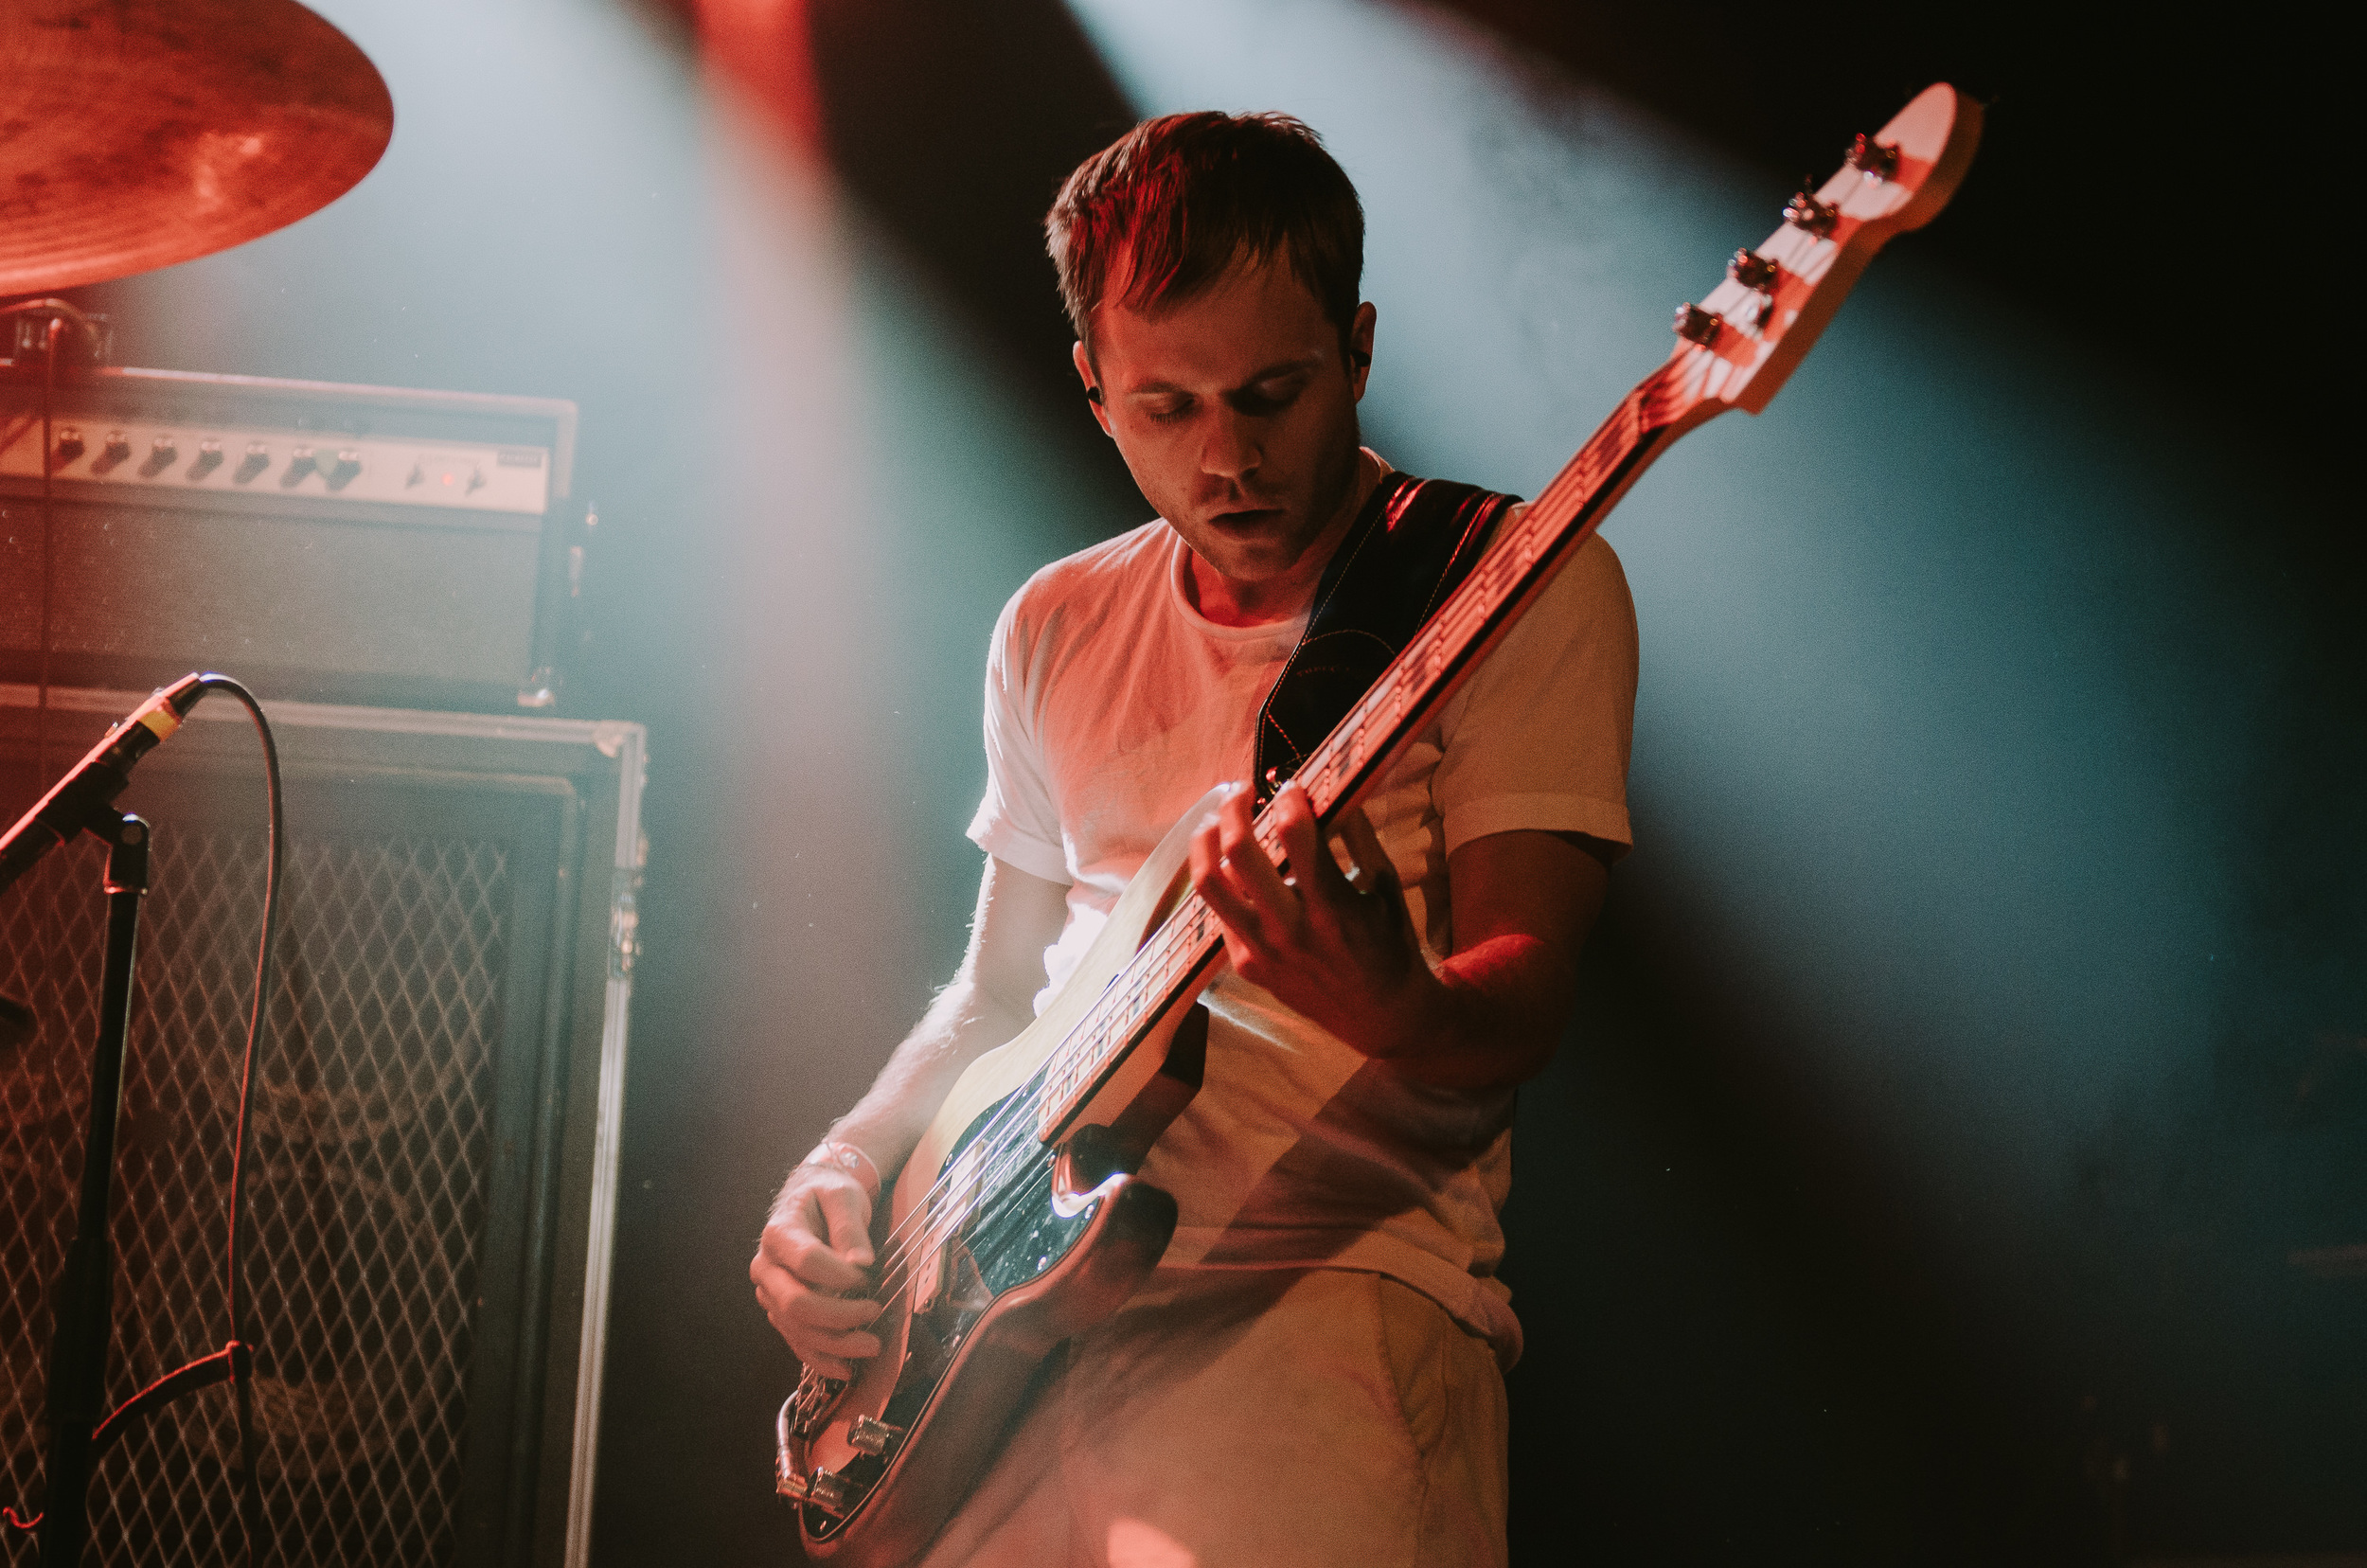 3_Thee_Oh_Sees_Commodore_Ballroom_Timothy_Nguyen_20160618 (2 of 17).jpg